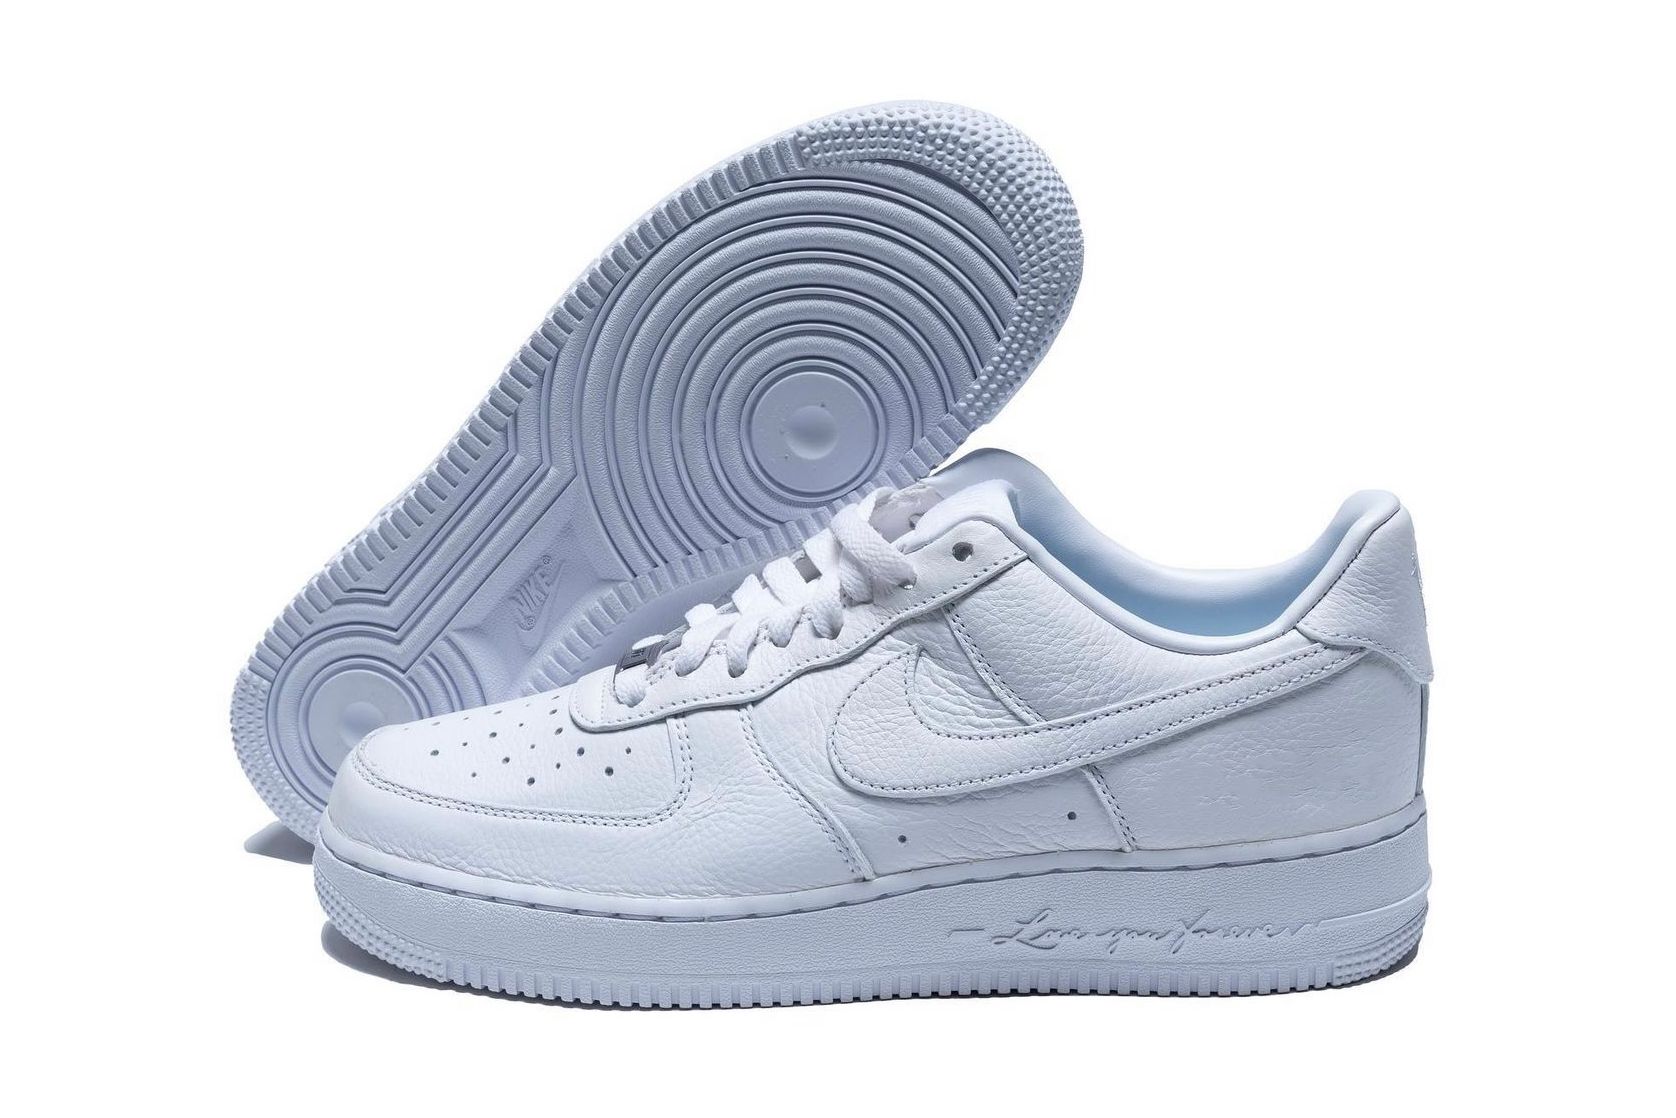 NOCTA x Nike Air Force 1 'Certified Lover Boy'